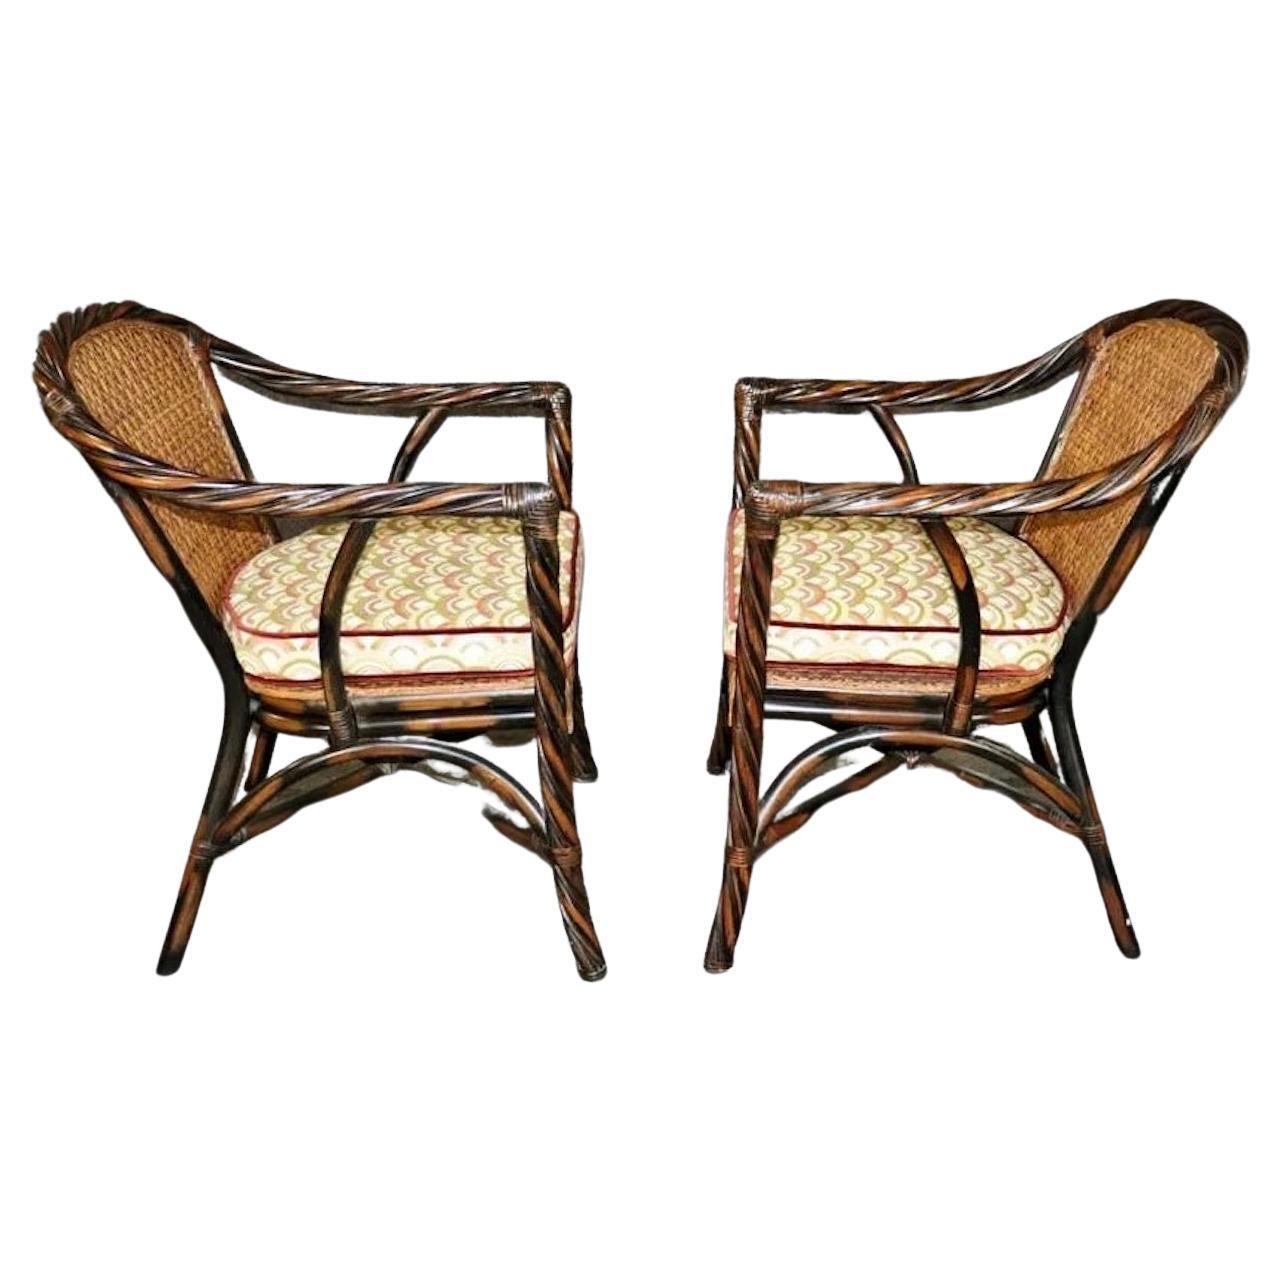 Pair of Twist Frame Wicker Chairs For Sale